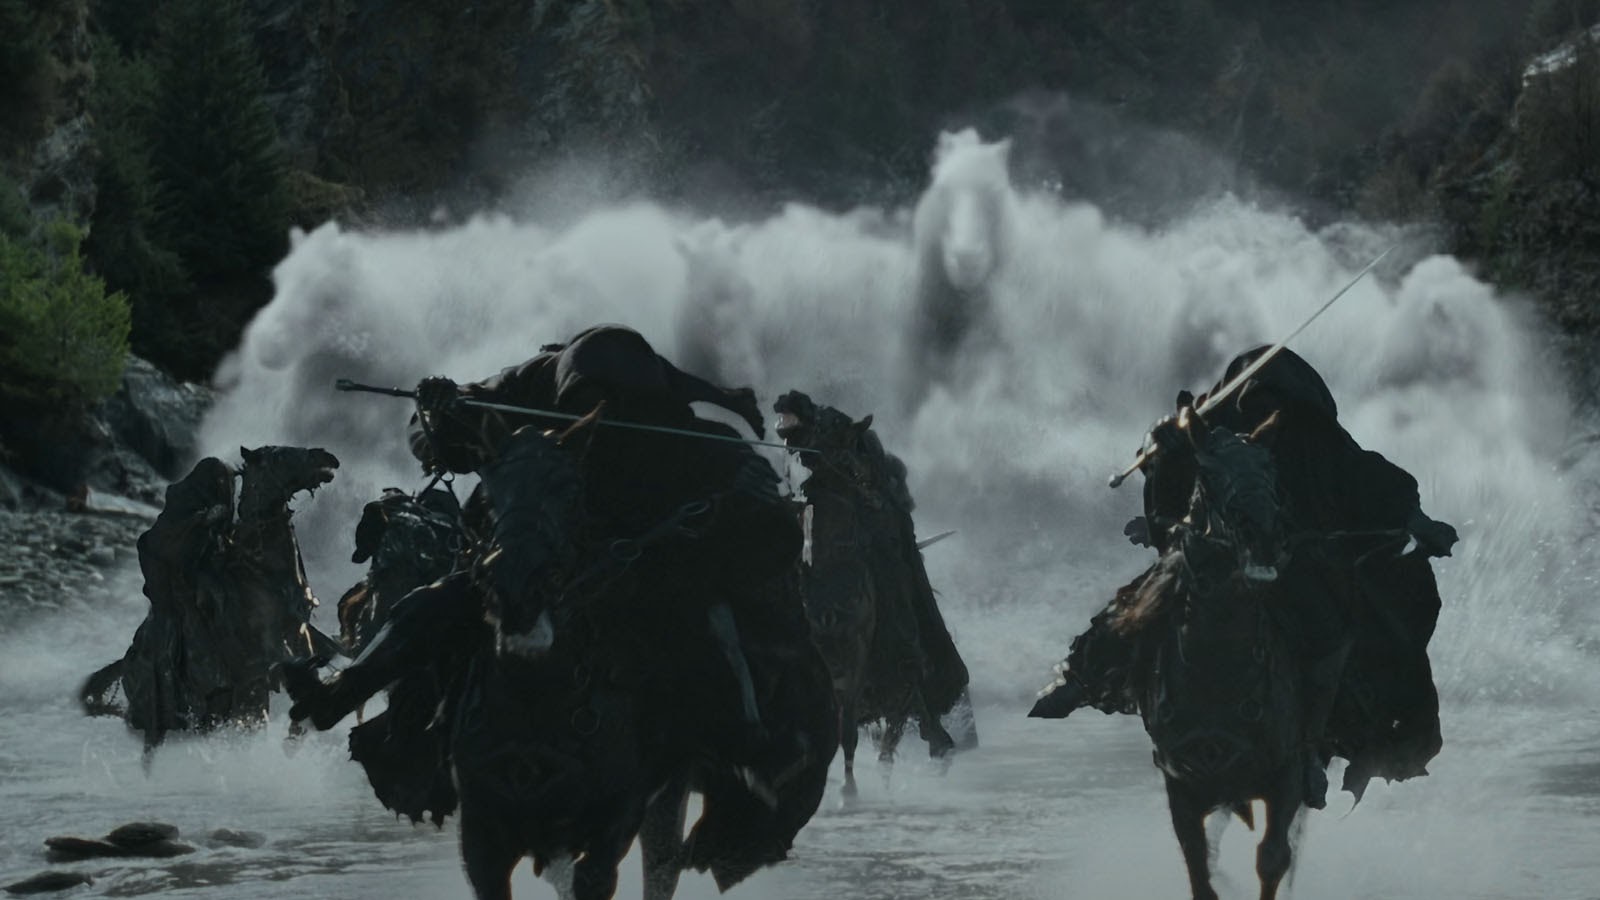 The Nazgul flee the rising waters of Misty Mountain. Image © New Line Cinema